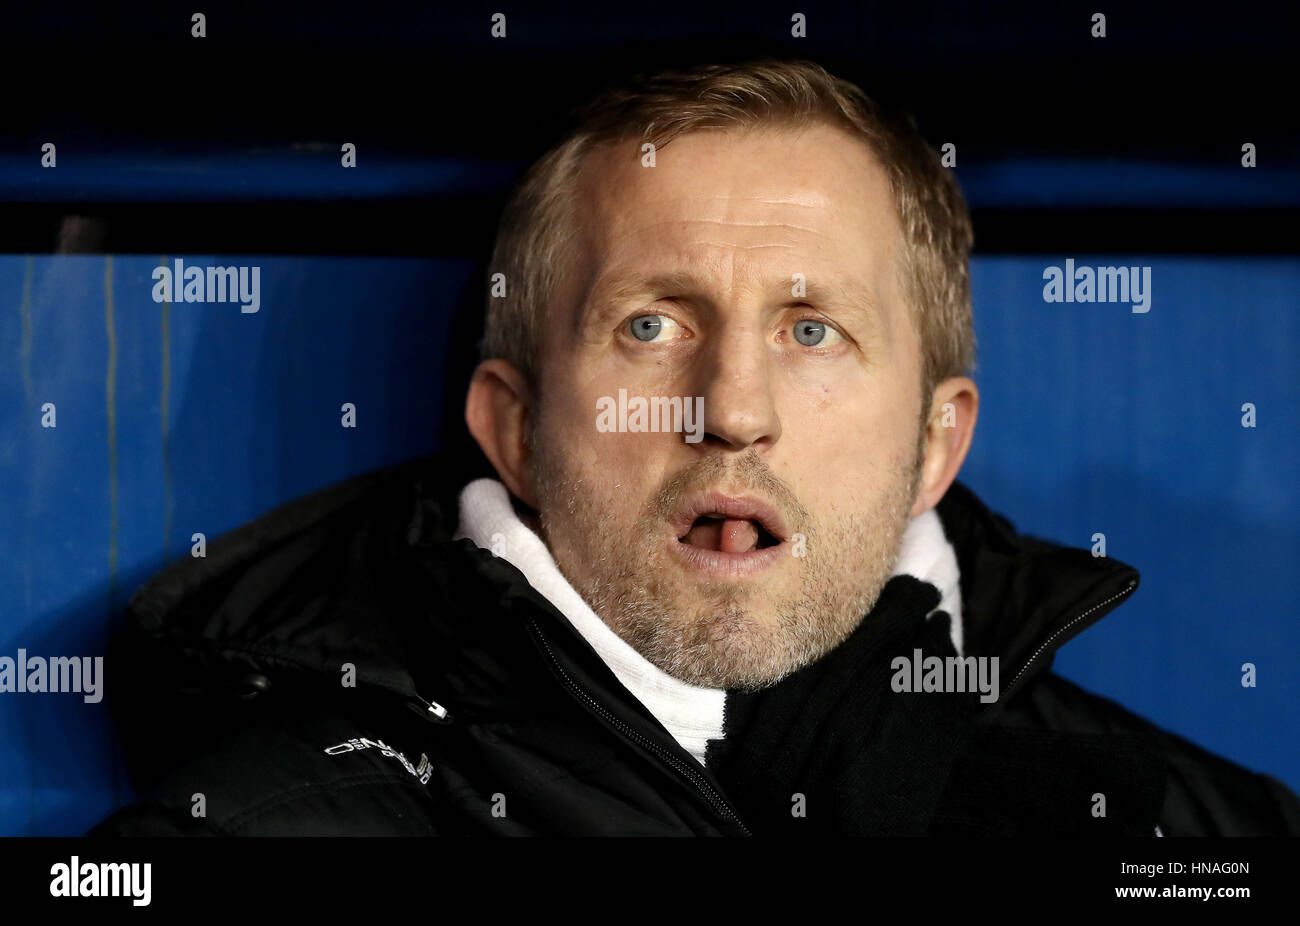 Widnes Vikings' Head Coach Dennis Betts before the game against Huddersfield Giants, during the Super League match at the Select Security Stadium, Widnes. Stock Photo